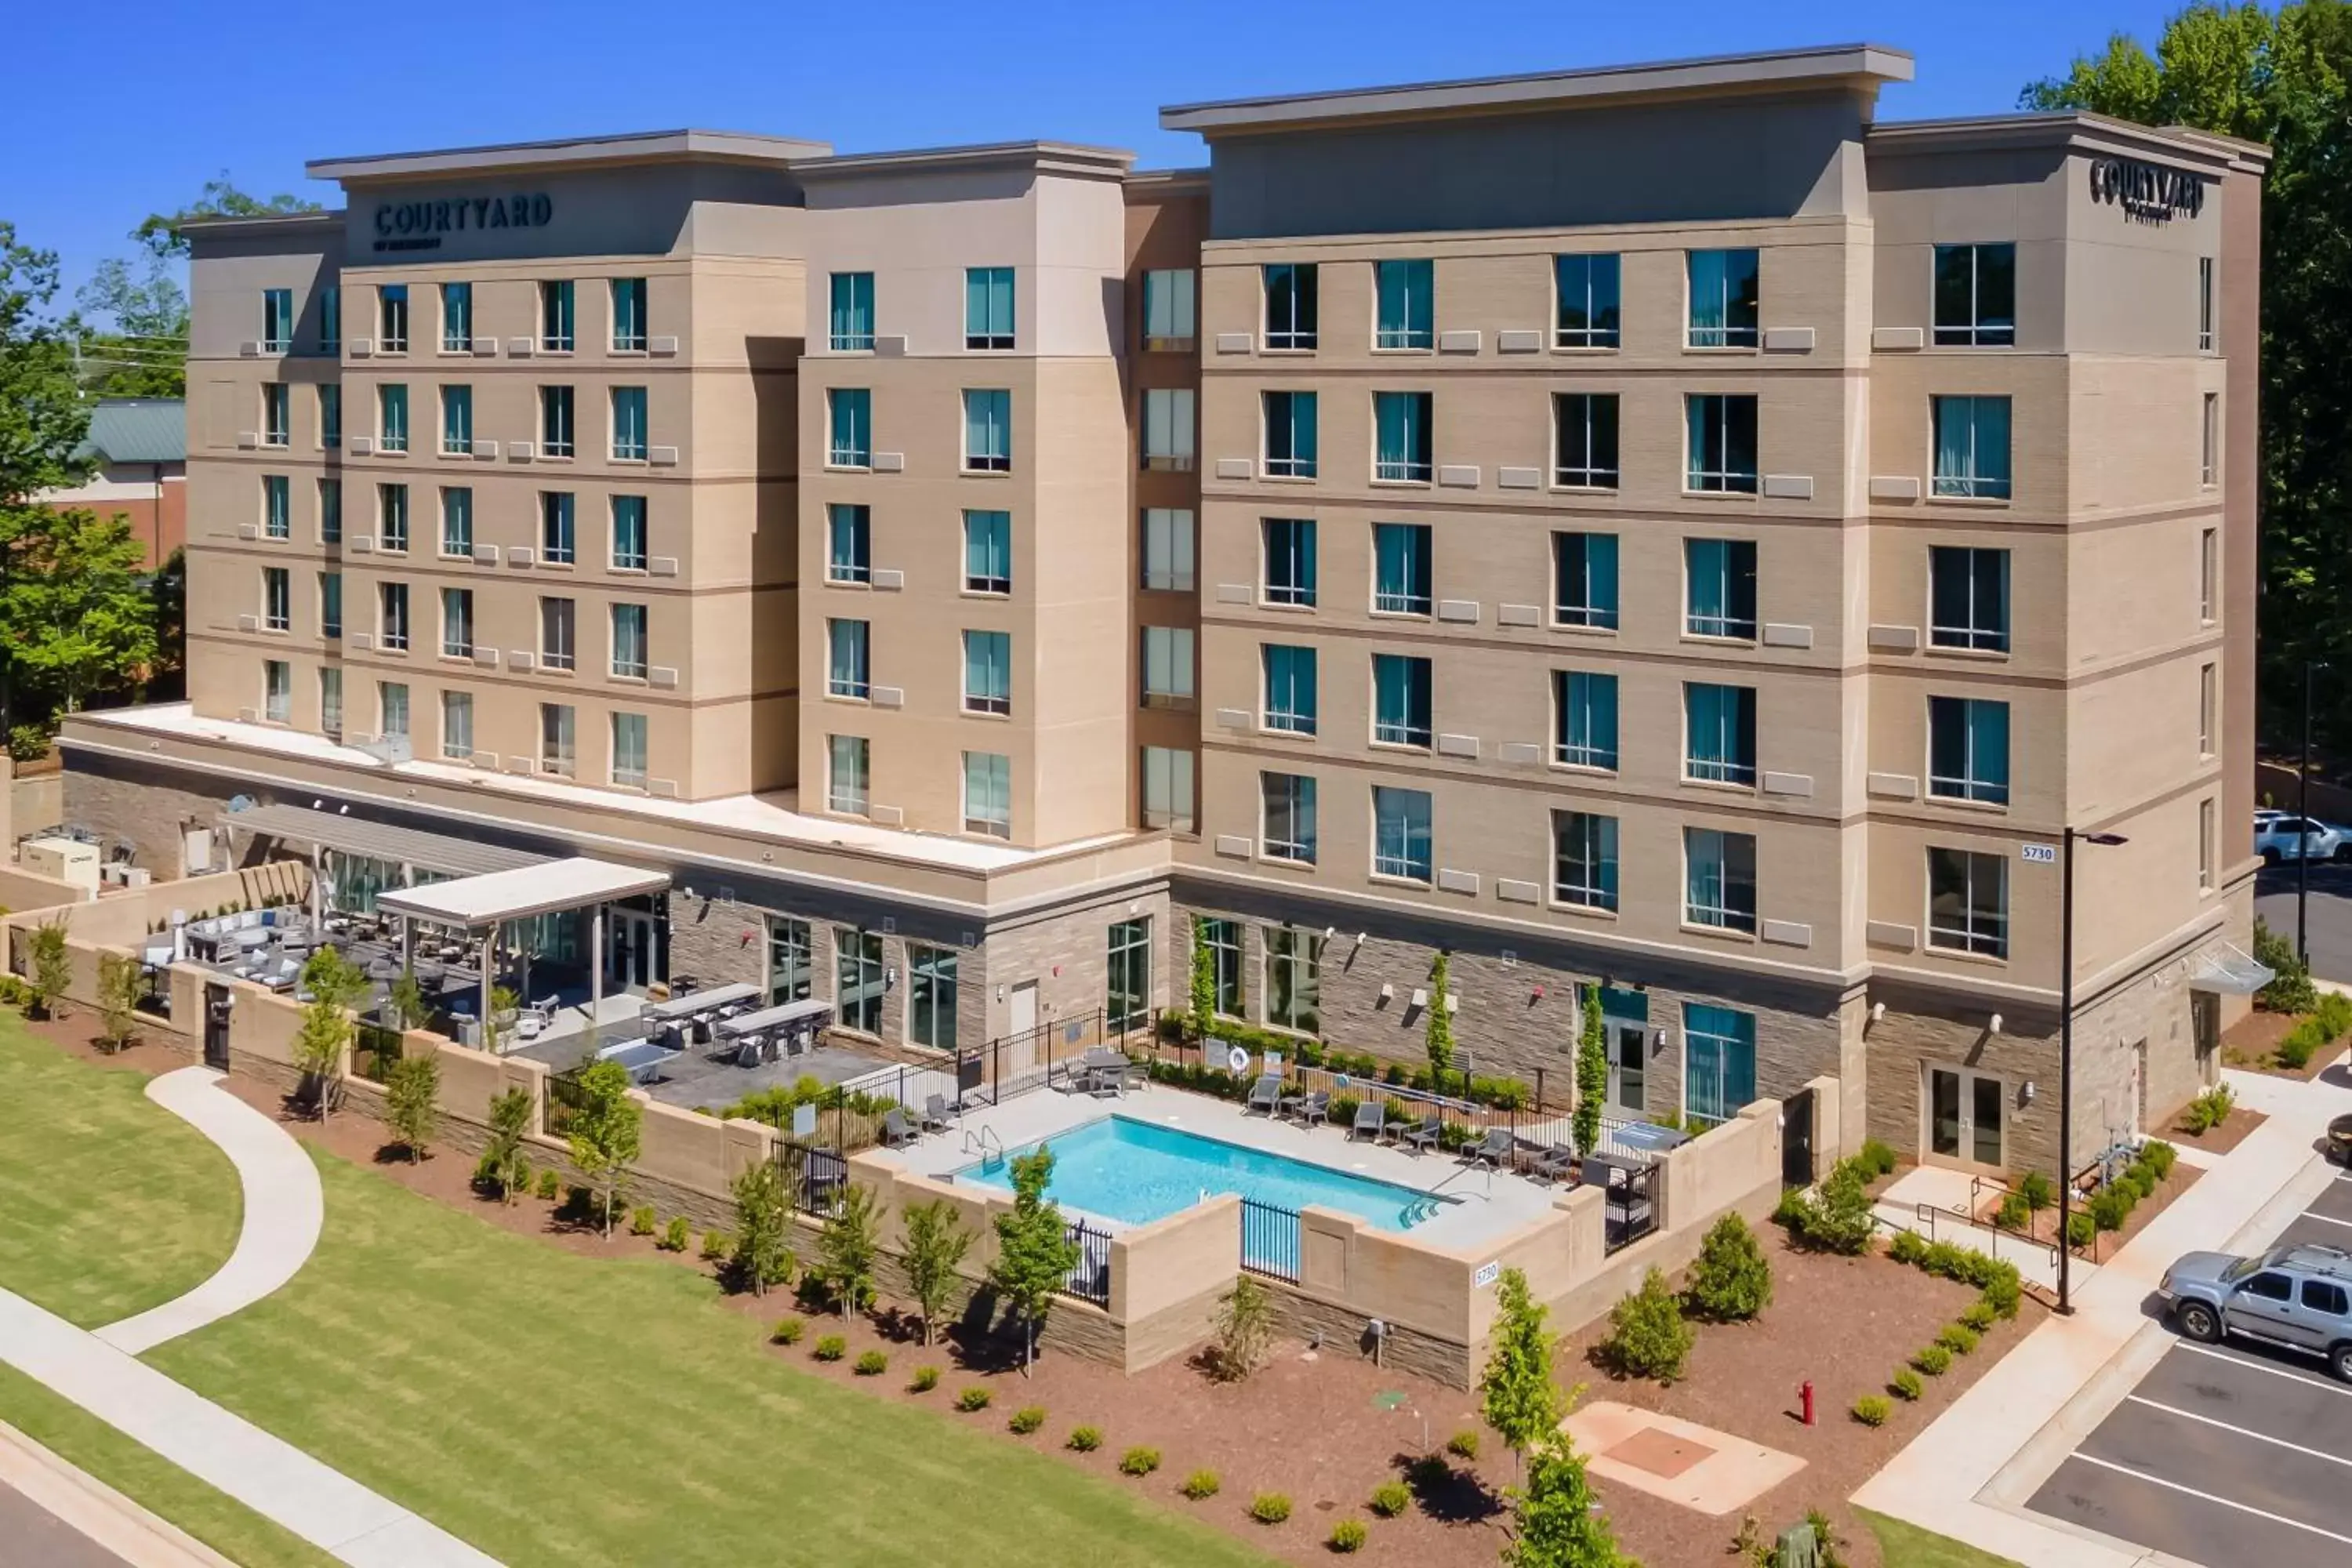 Property building, Pool View in Courtyard by Marriott Raleigh Cary Crossroads